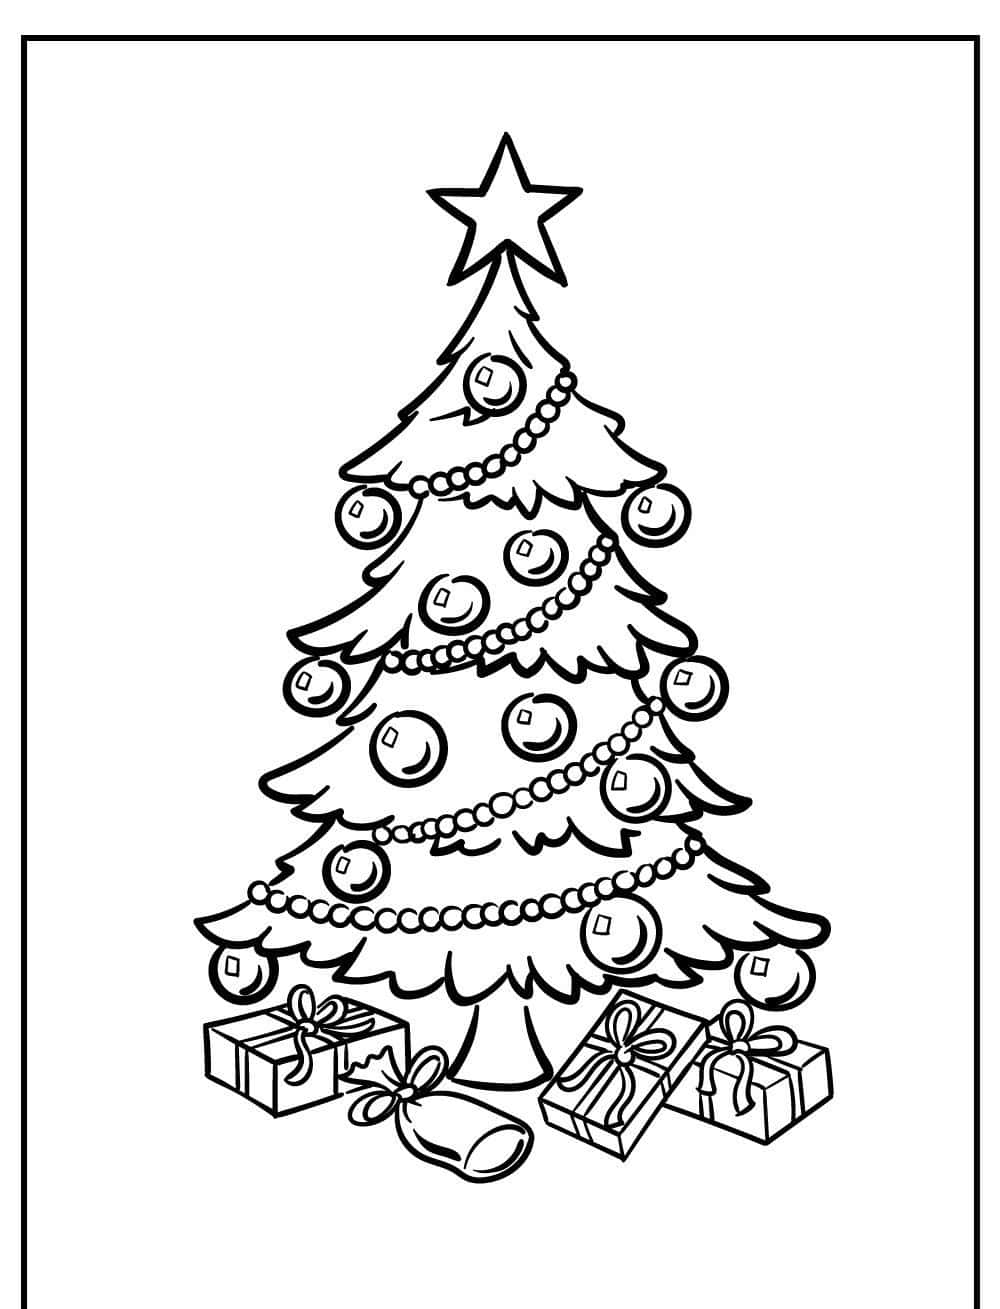 A beautiful Christmas coloring picture to make the holidays even more special